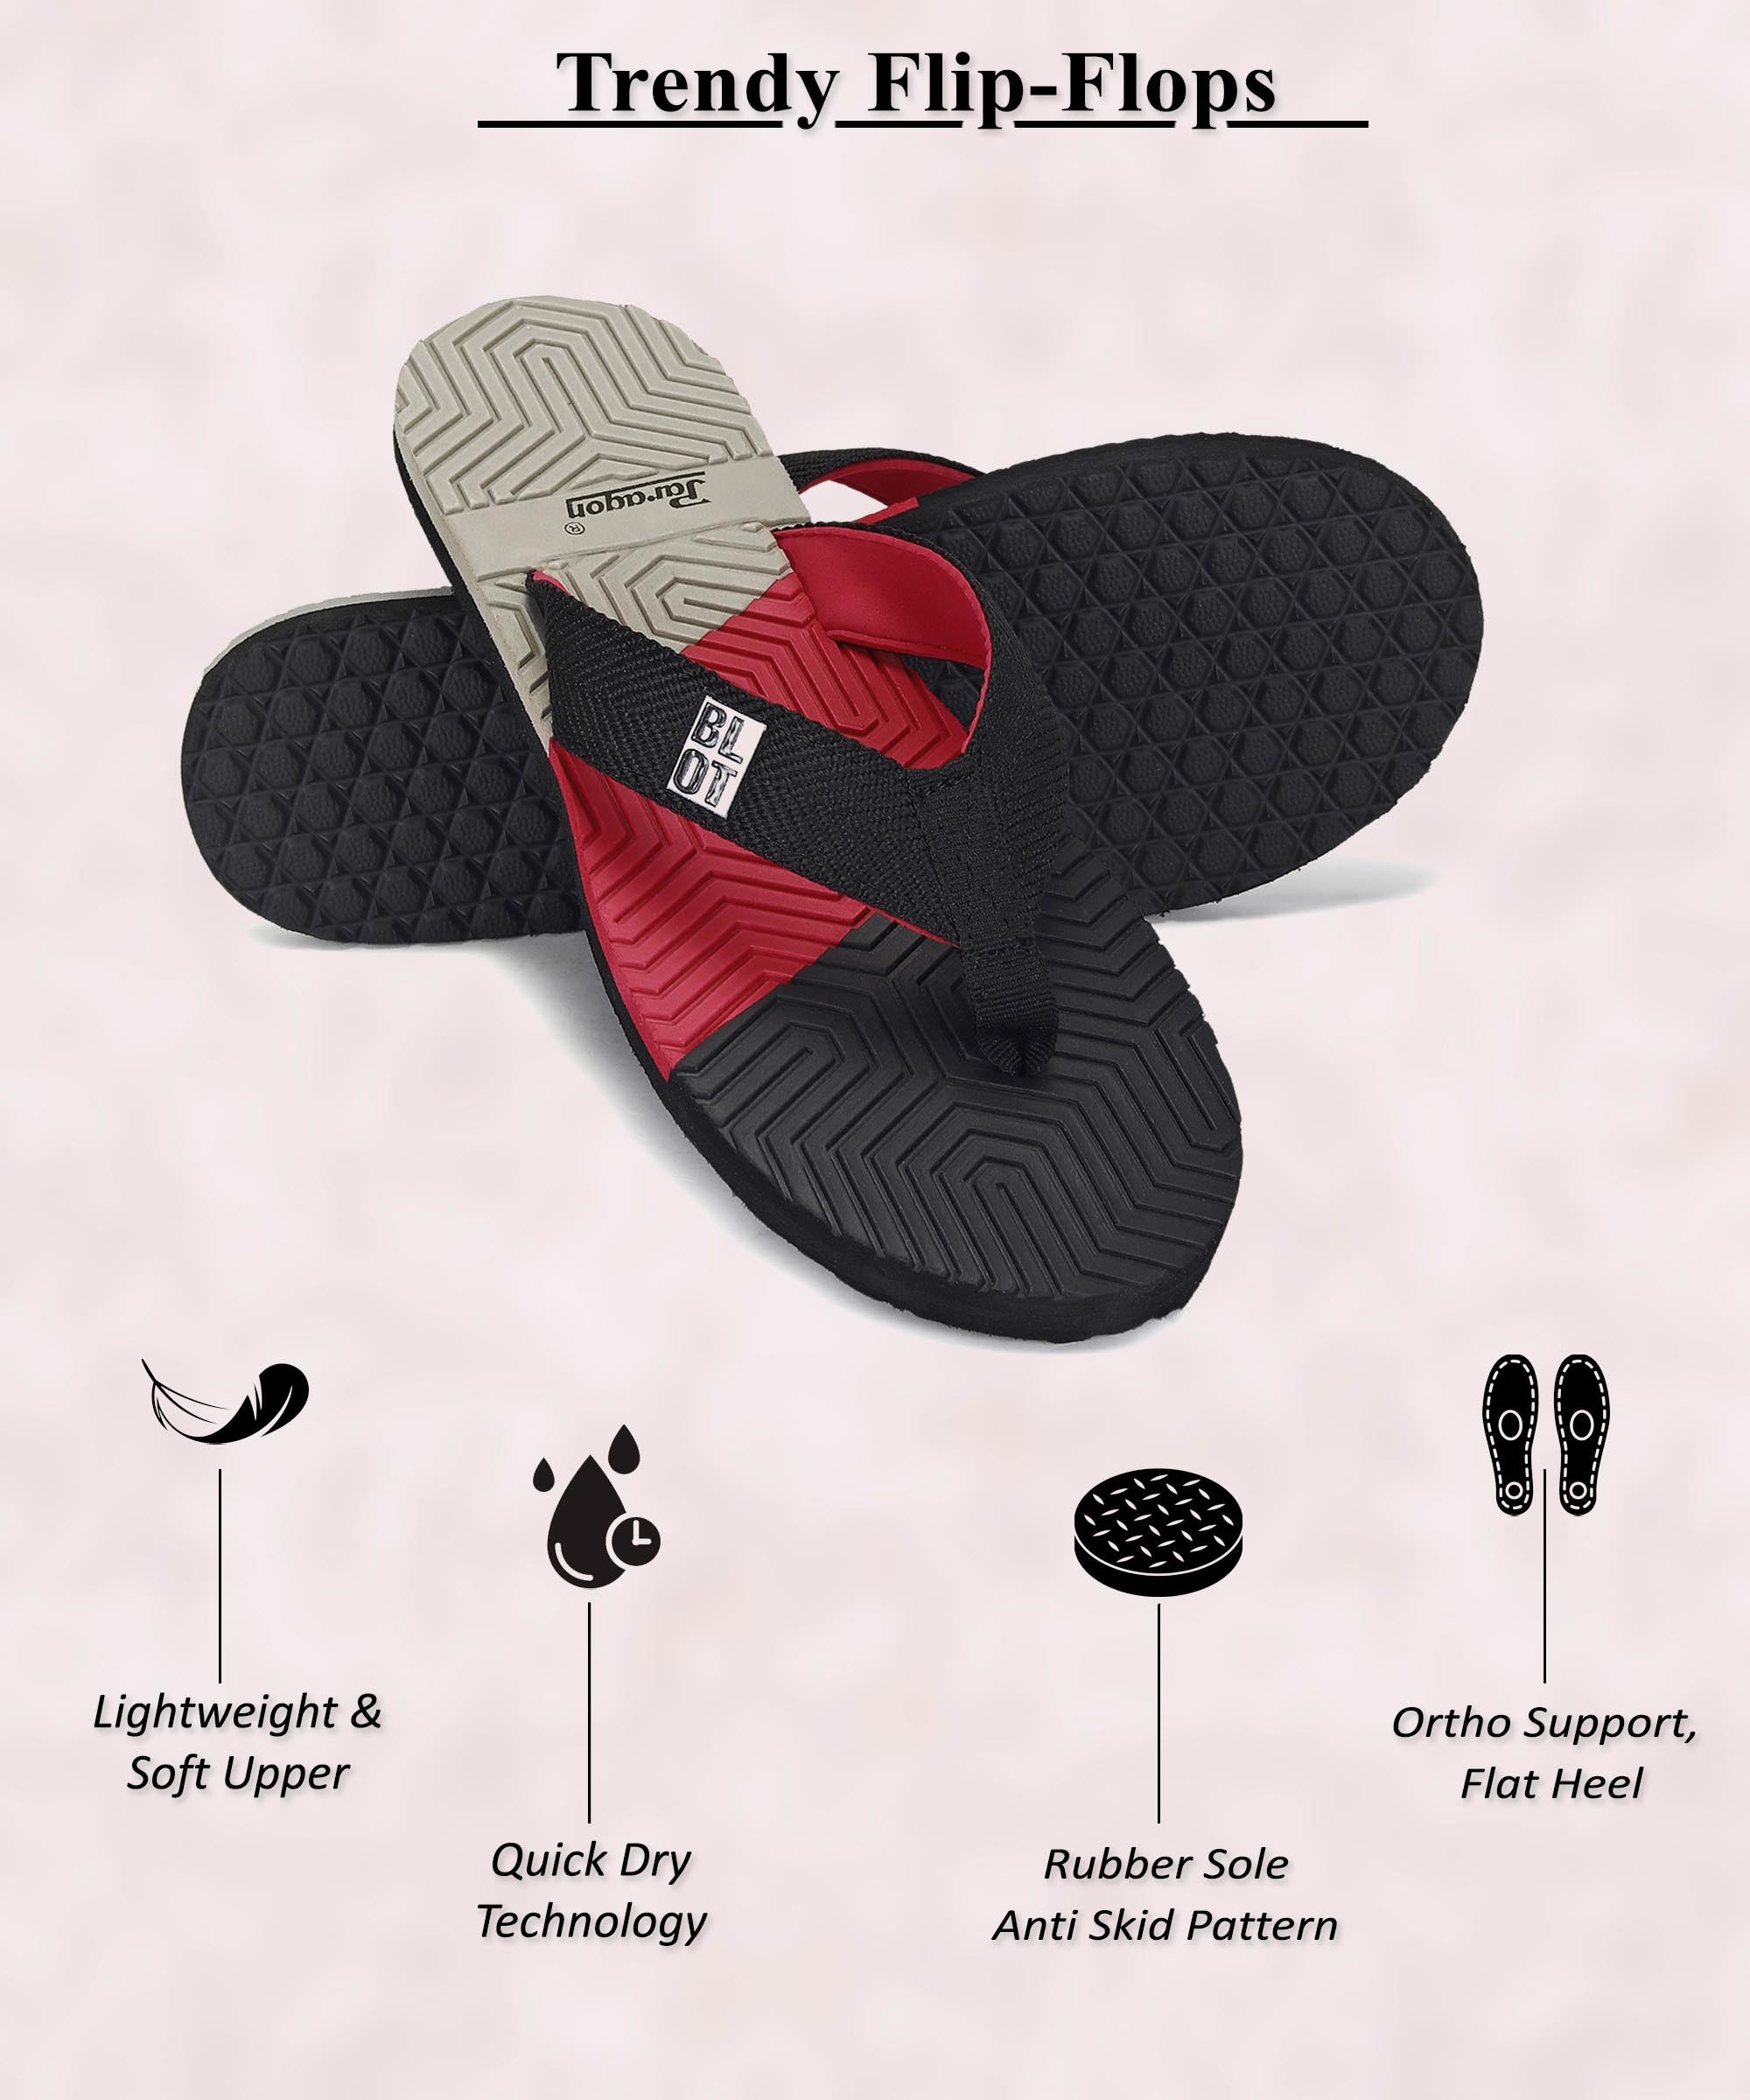 Paragon K3311G Men Stylish Flip Flops | Comfortable Flip Flops for Daily Use | Lightweight and Easy to Wash